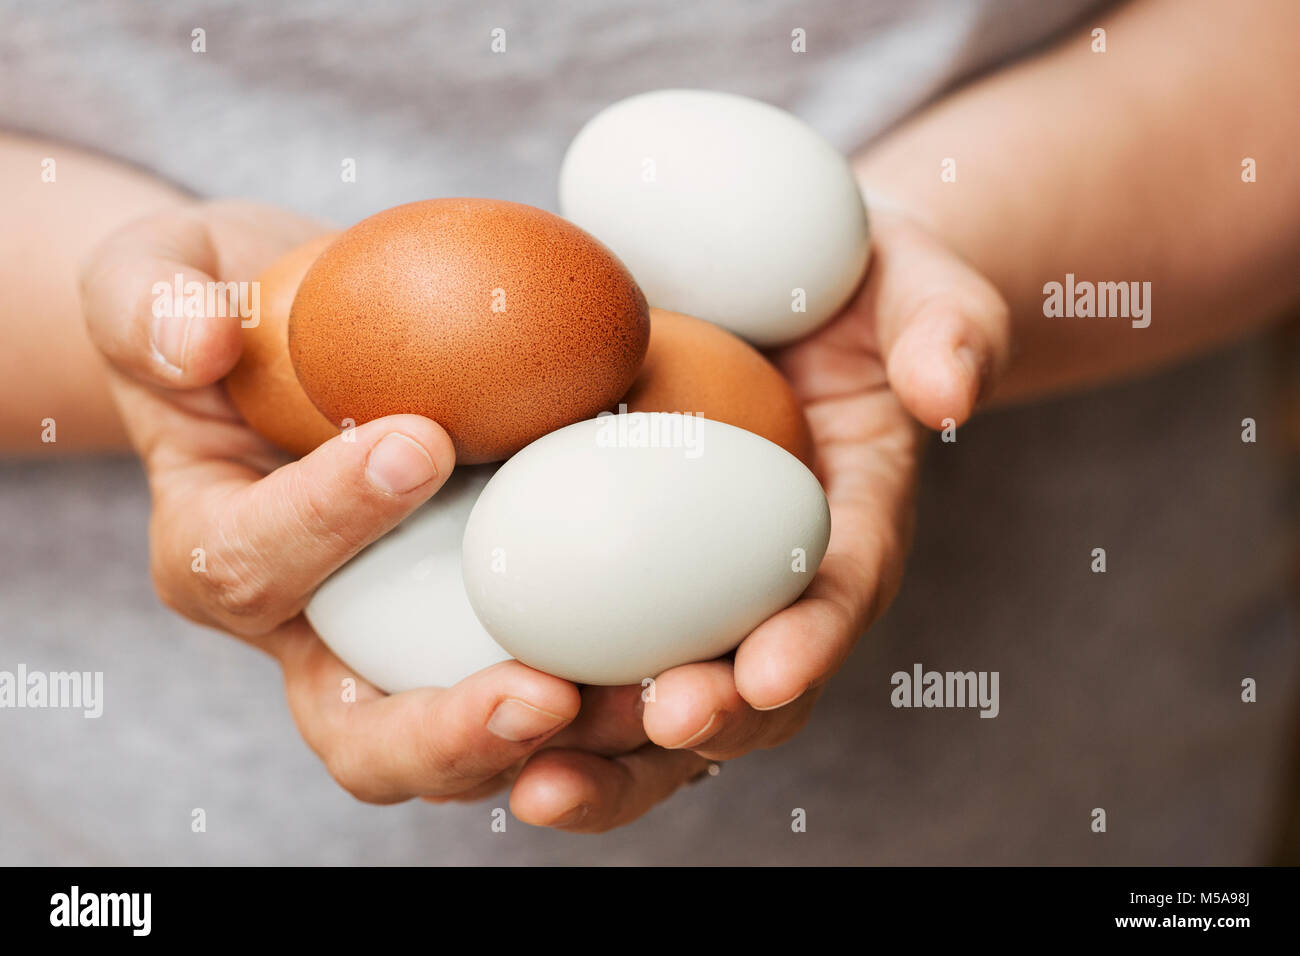 A woman holding hands full of fresh brown and white eggs. Stock Photo